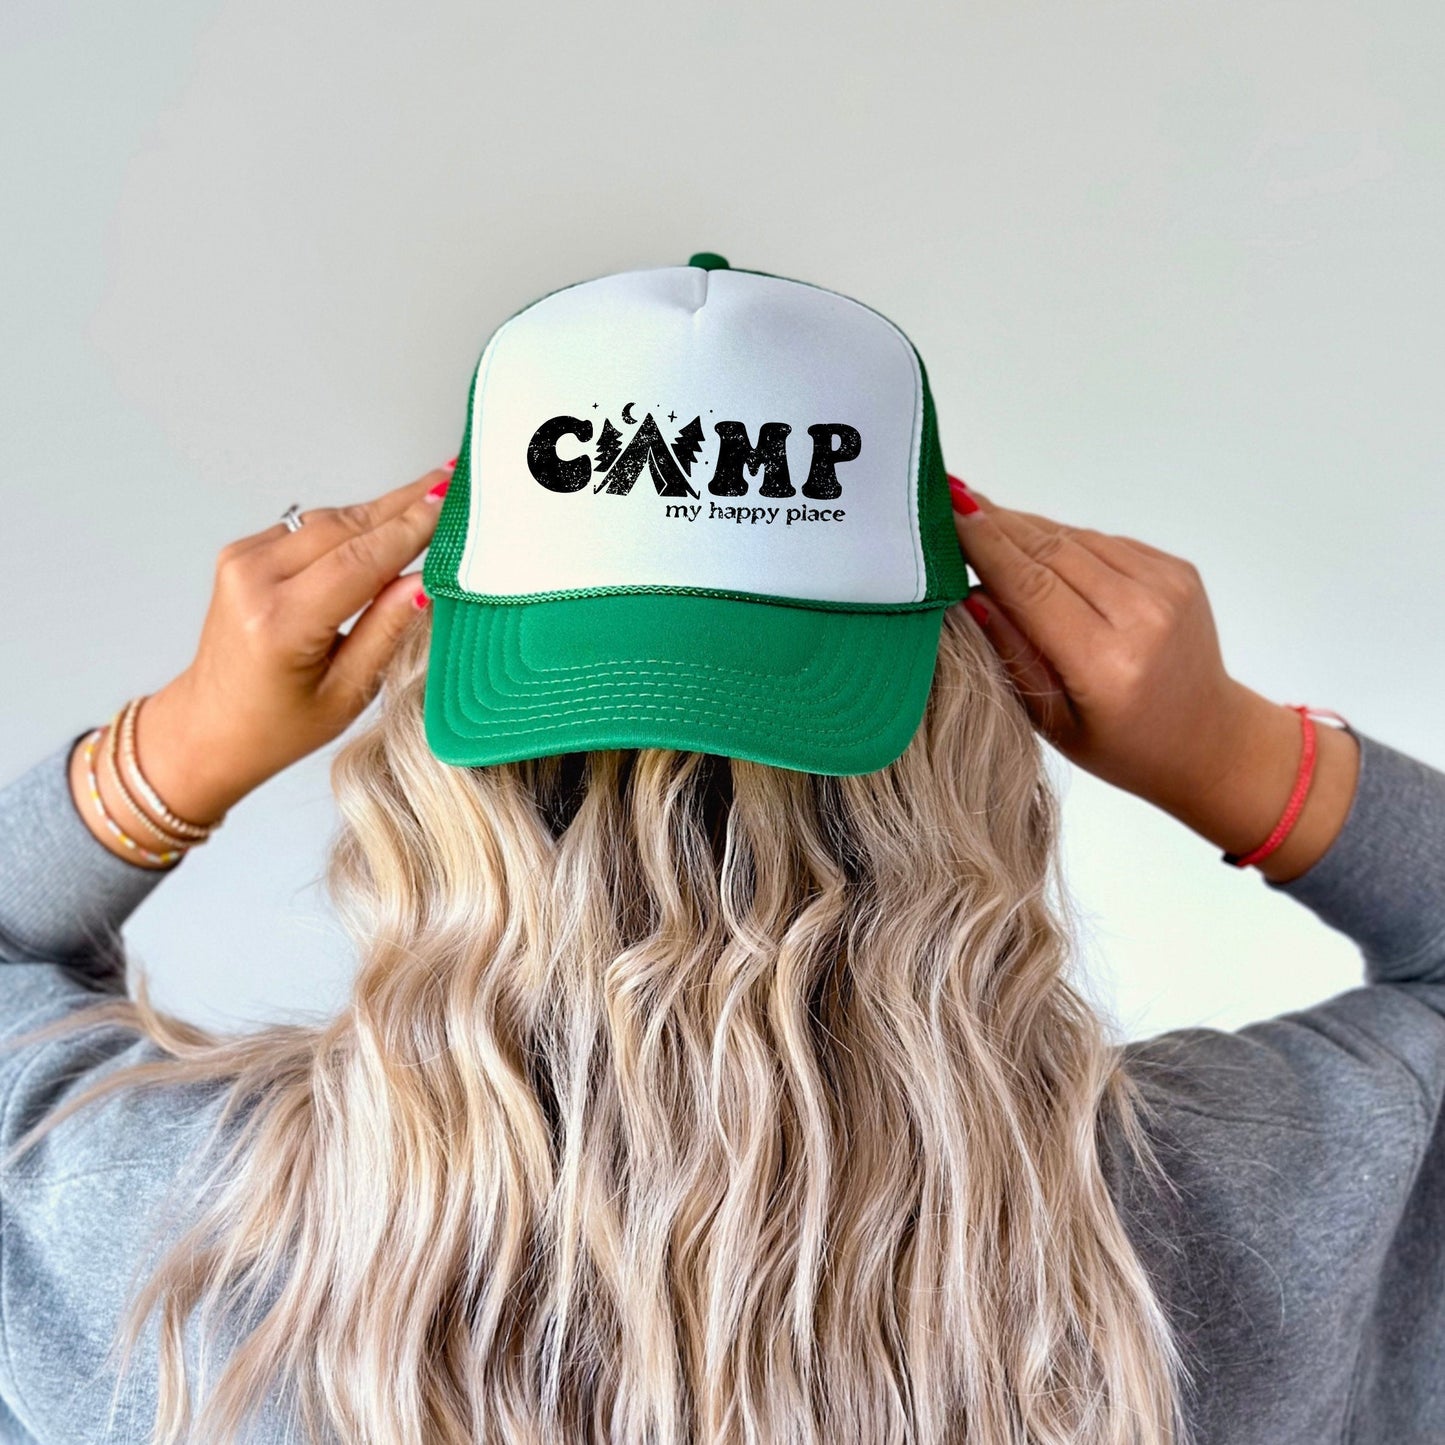 a woman wearing a green and white camp hat